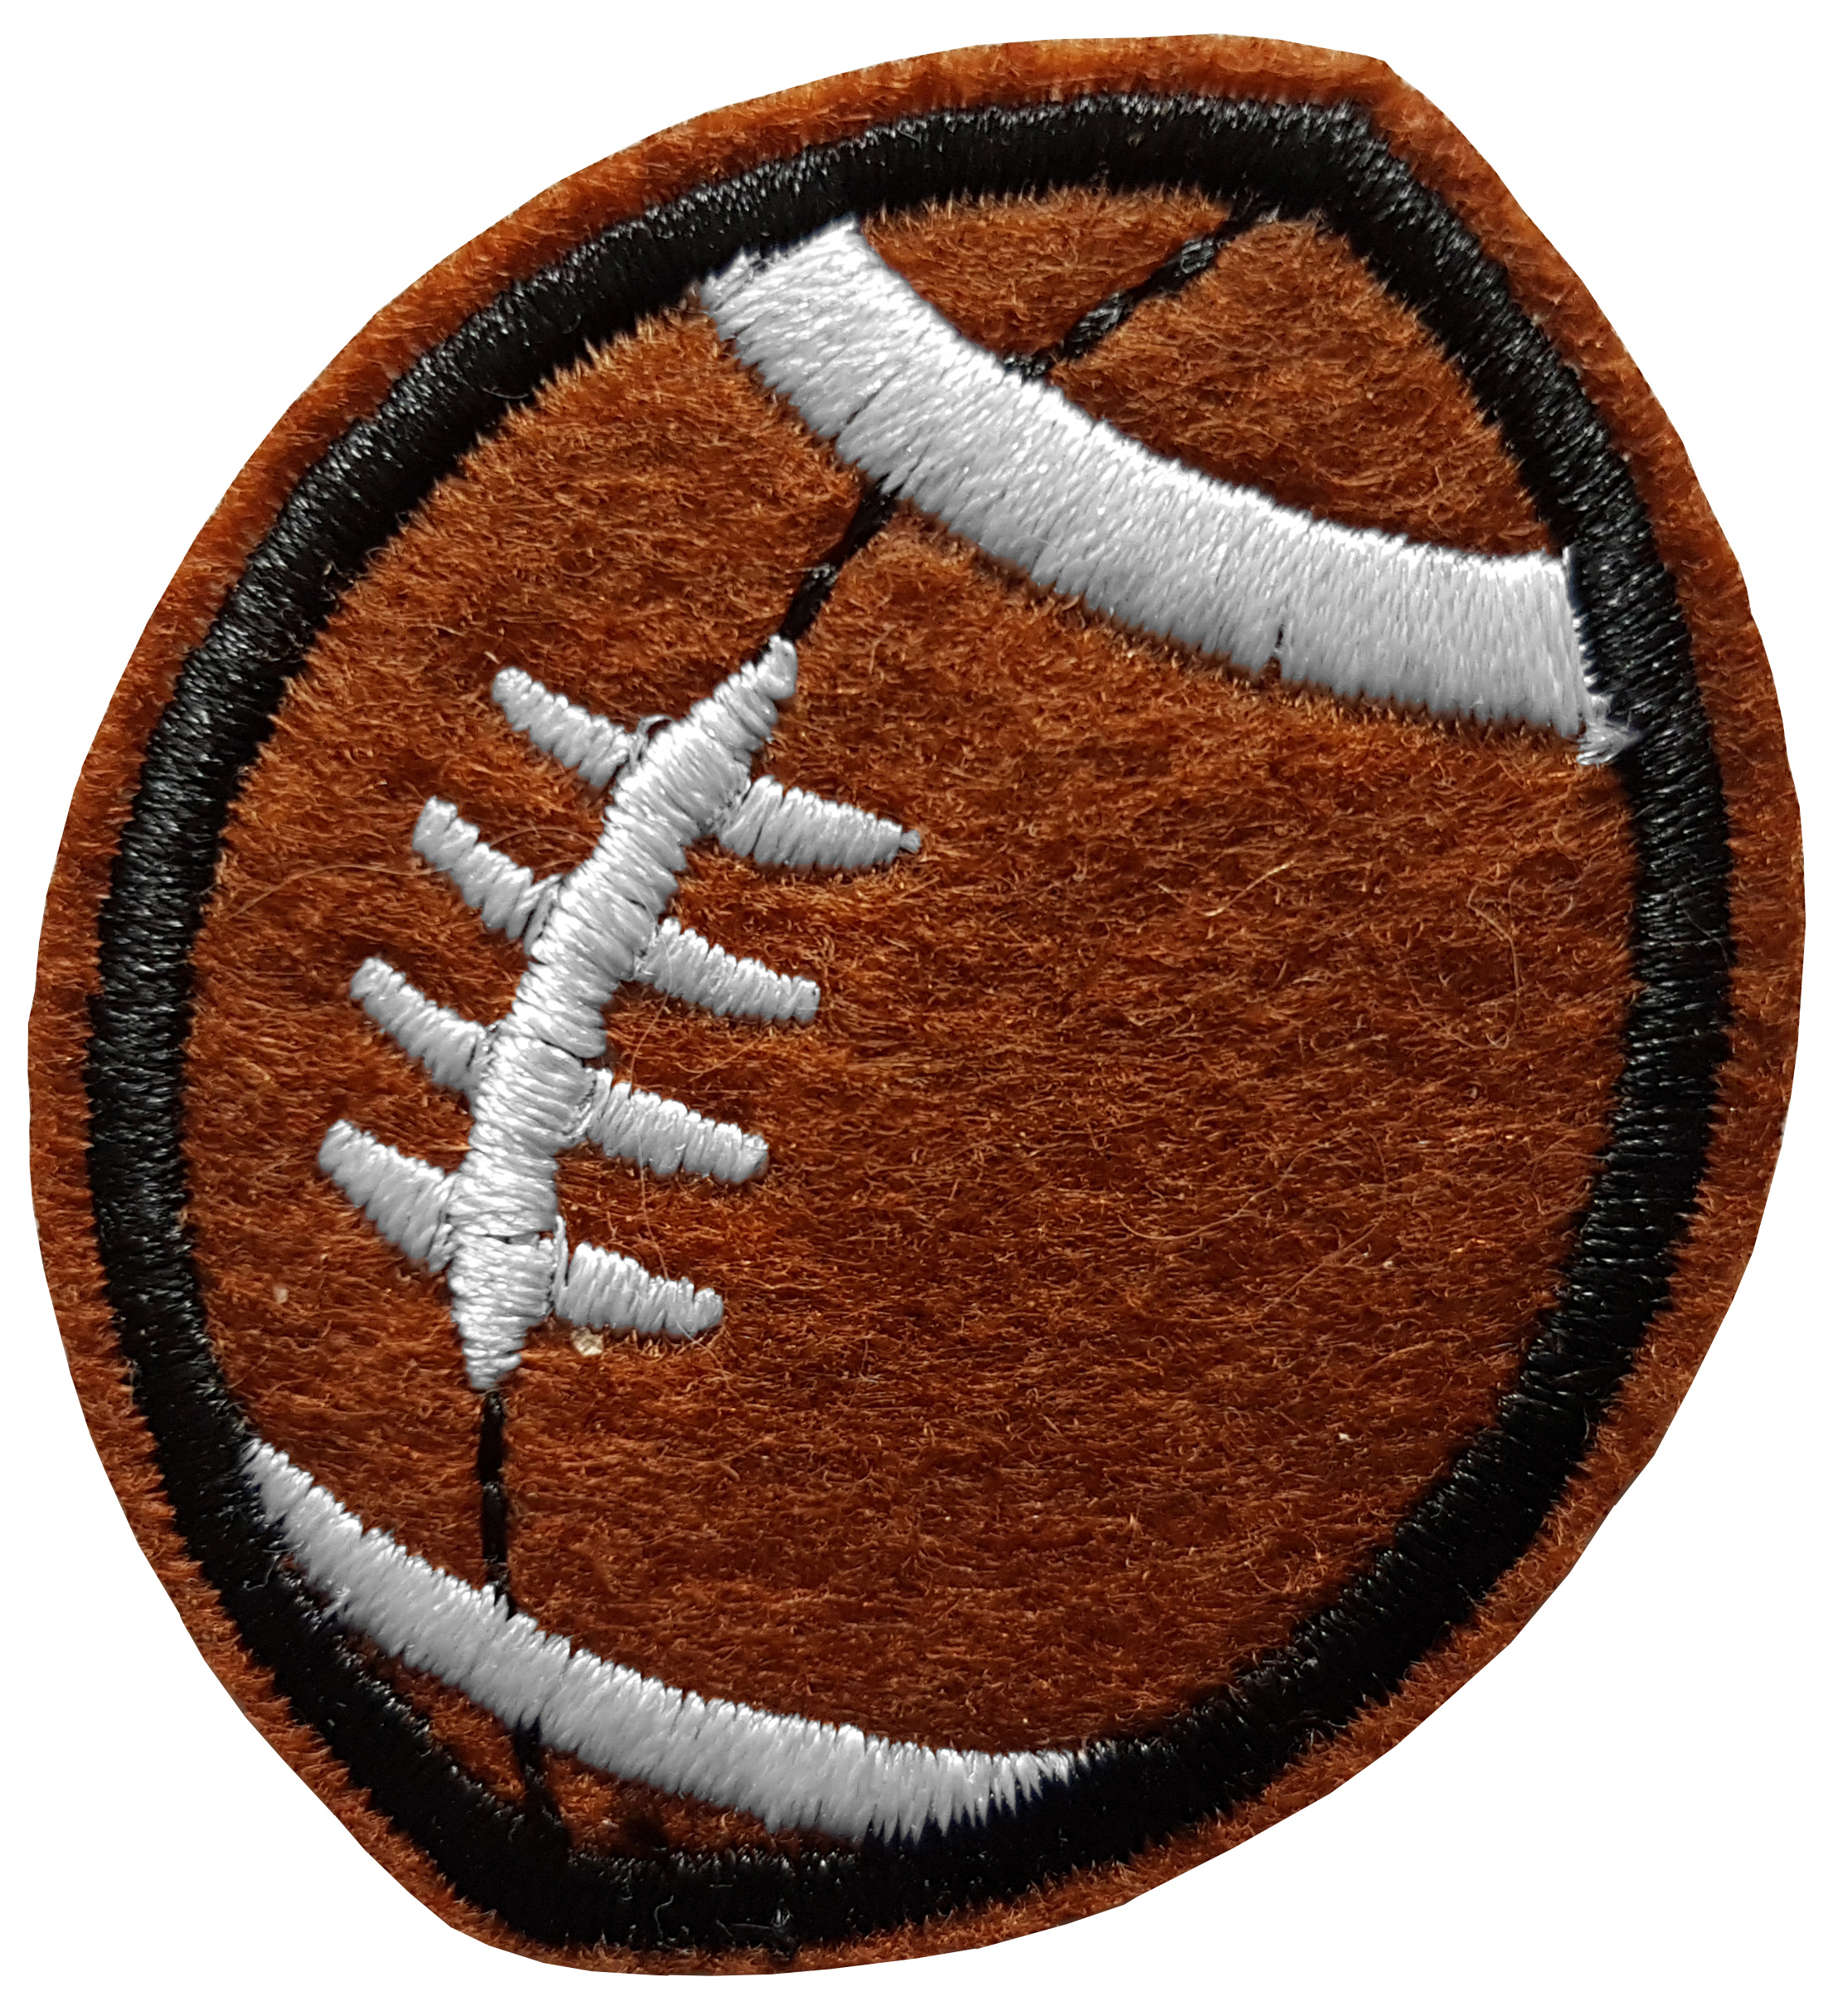 Patch Thermocollant Ballon de Rugby